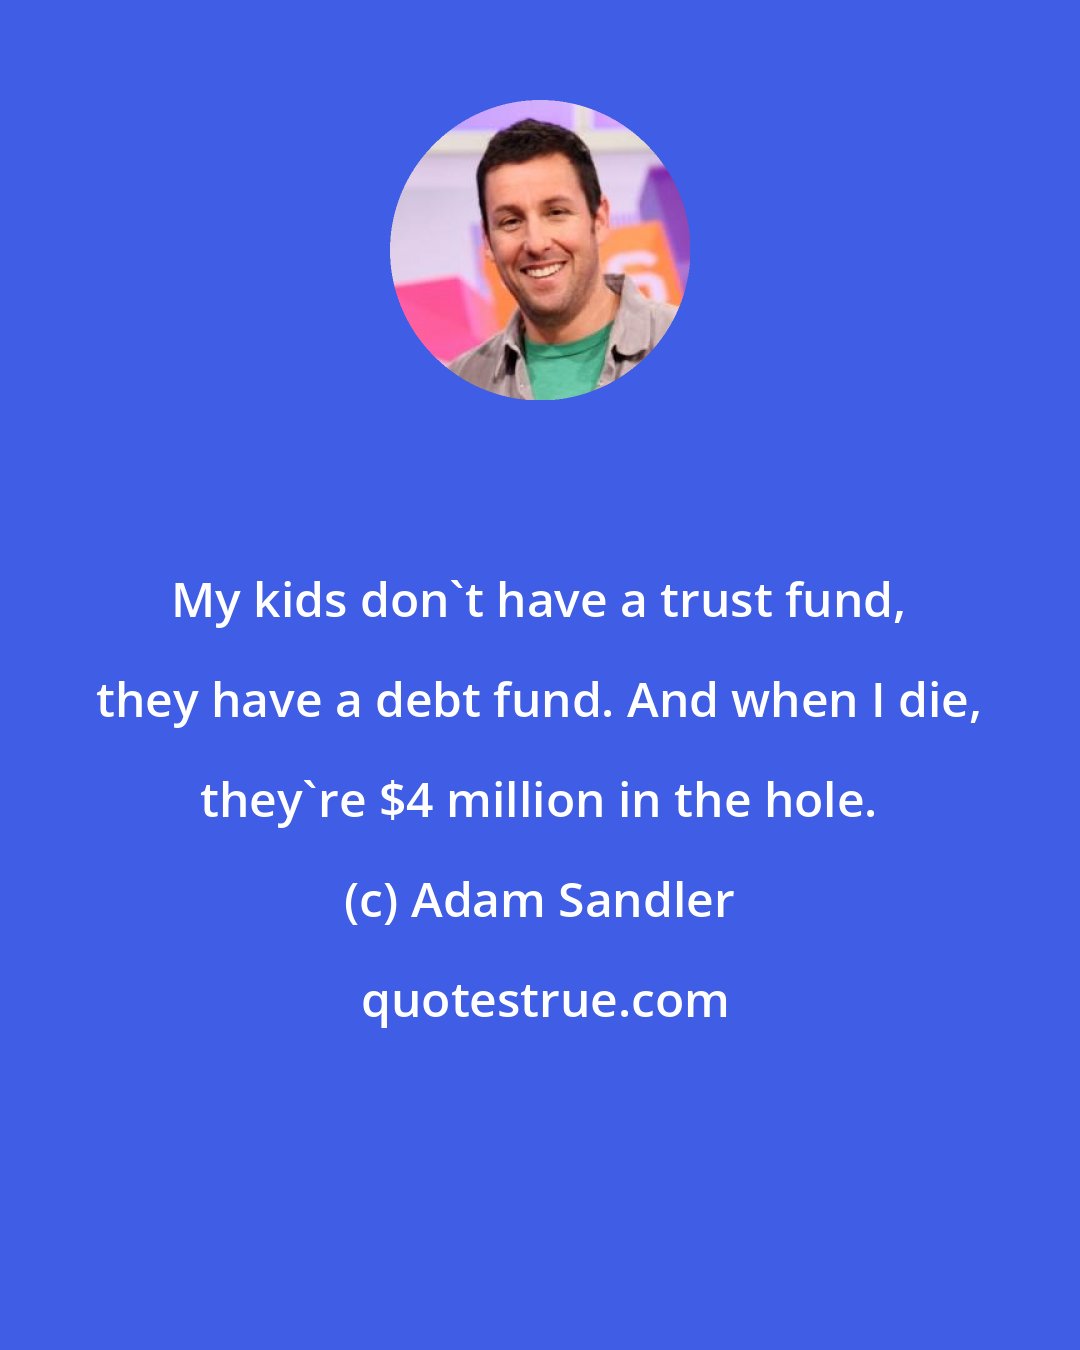 Adam Sandler: My kids don't have a trust fund, they have a debt fund. And when I die, they're $4 million in the hole.